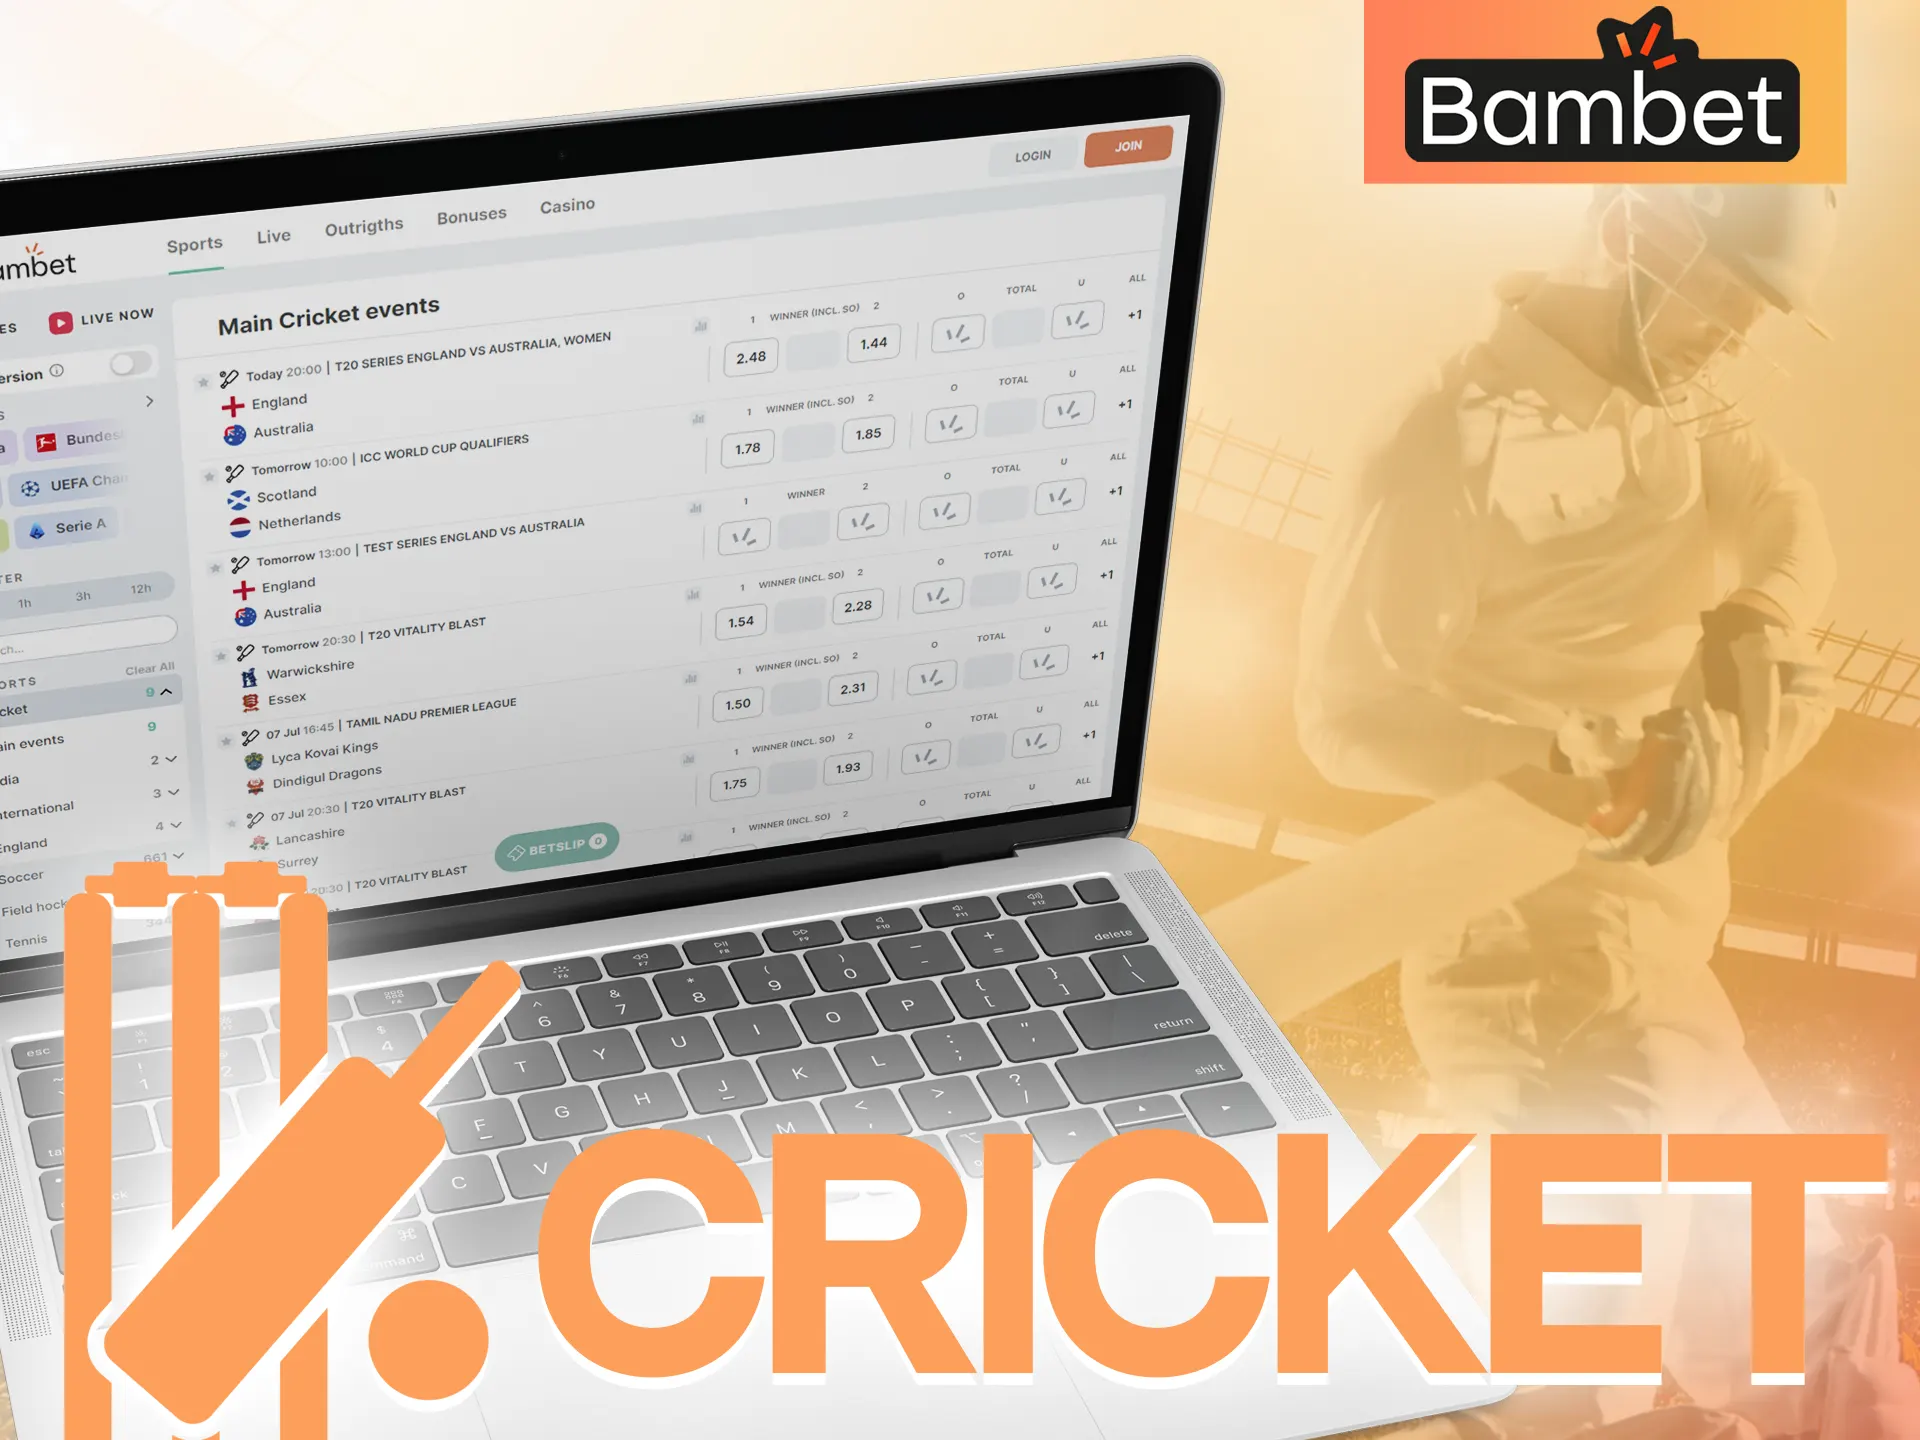 Bet on your favorite cricket team to win with Bambet.